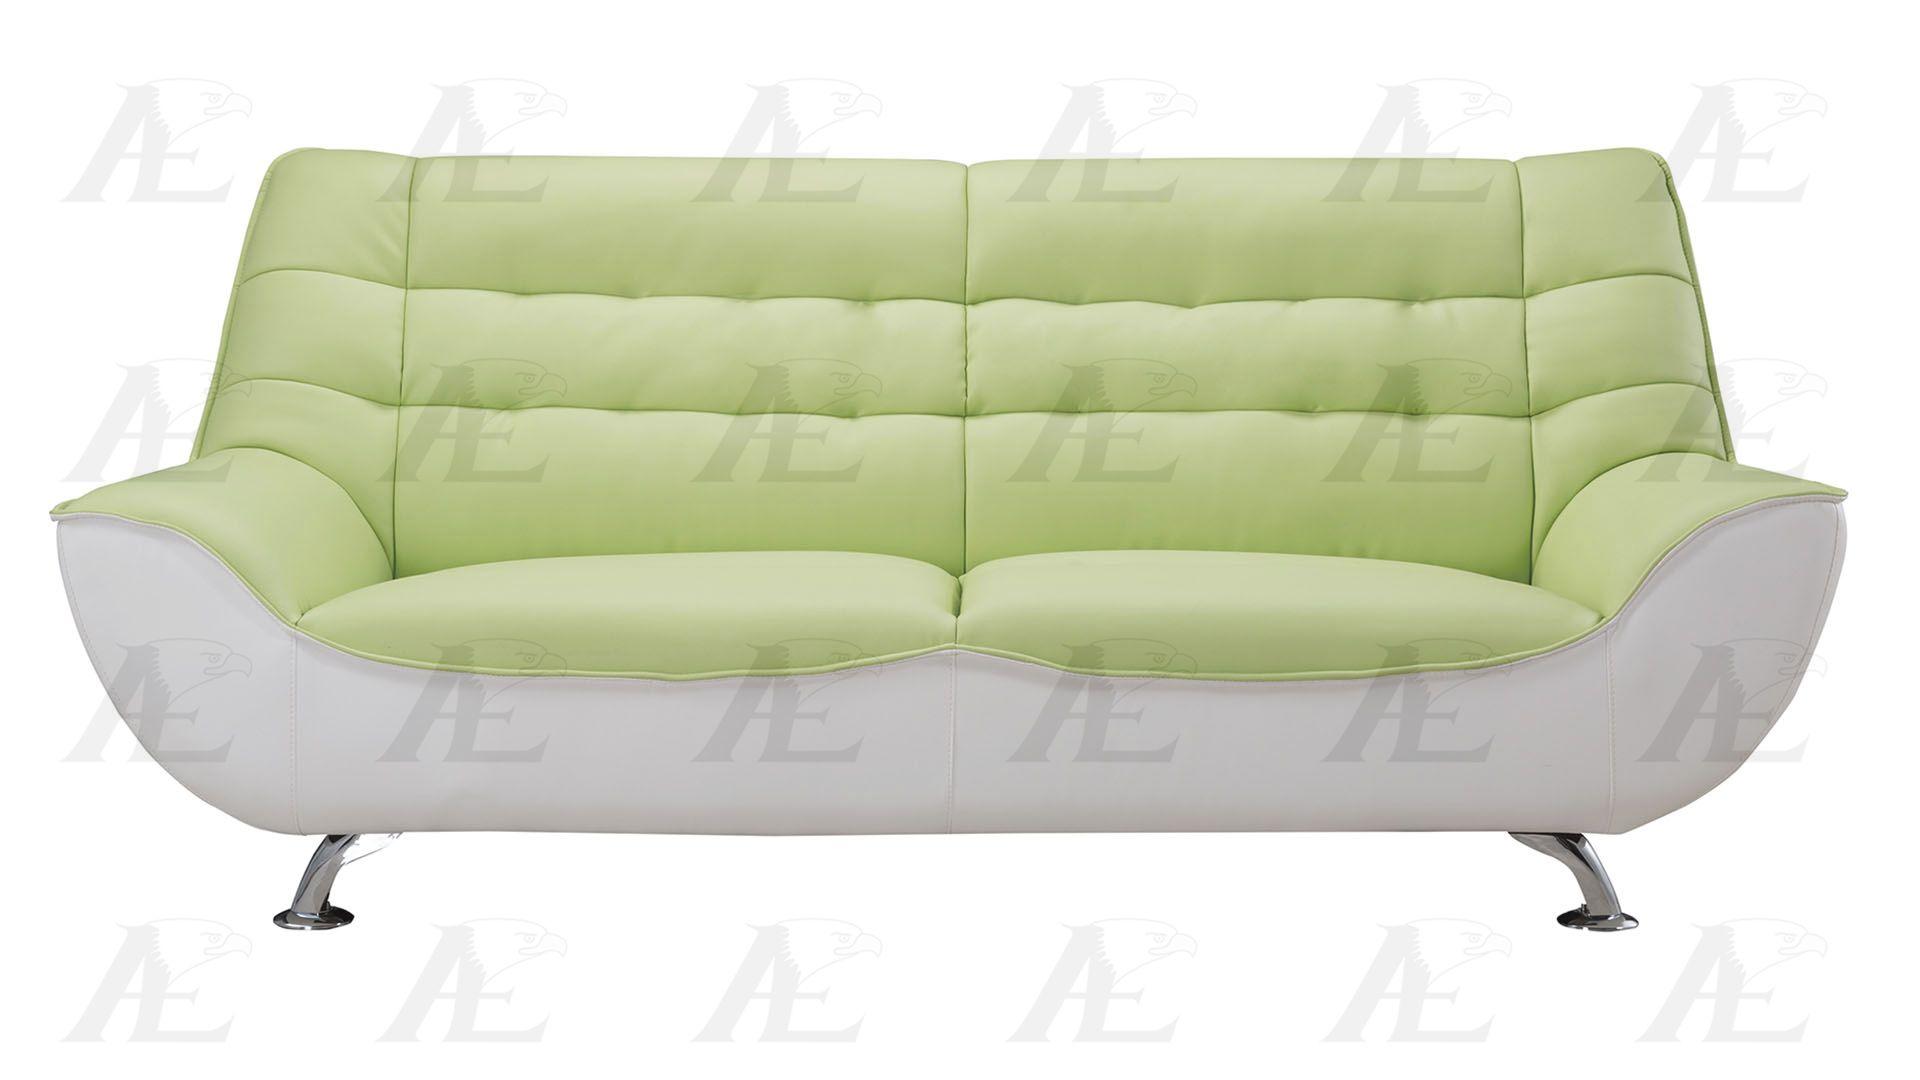 Modern Sofa AE612-GN.W AE612-GN.W in Green, White Bonded Leather